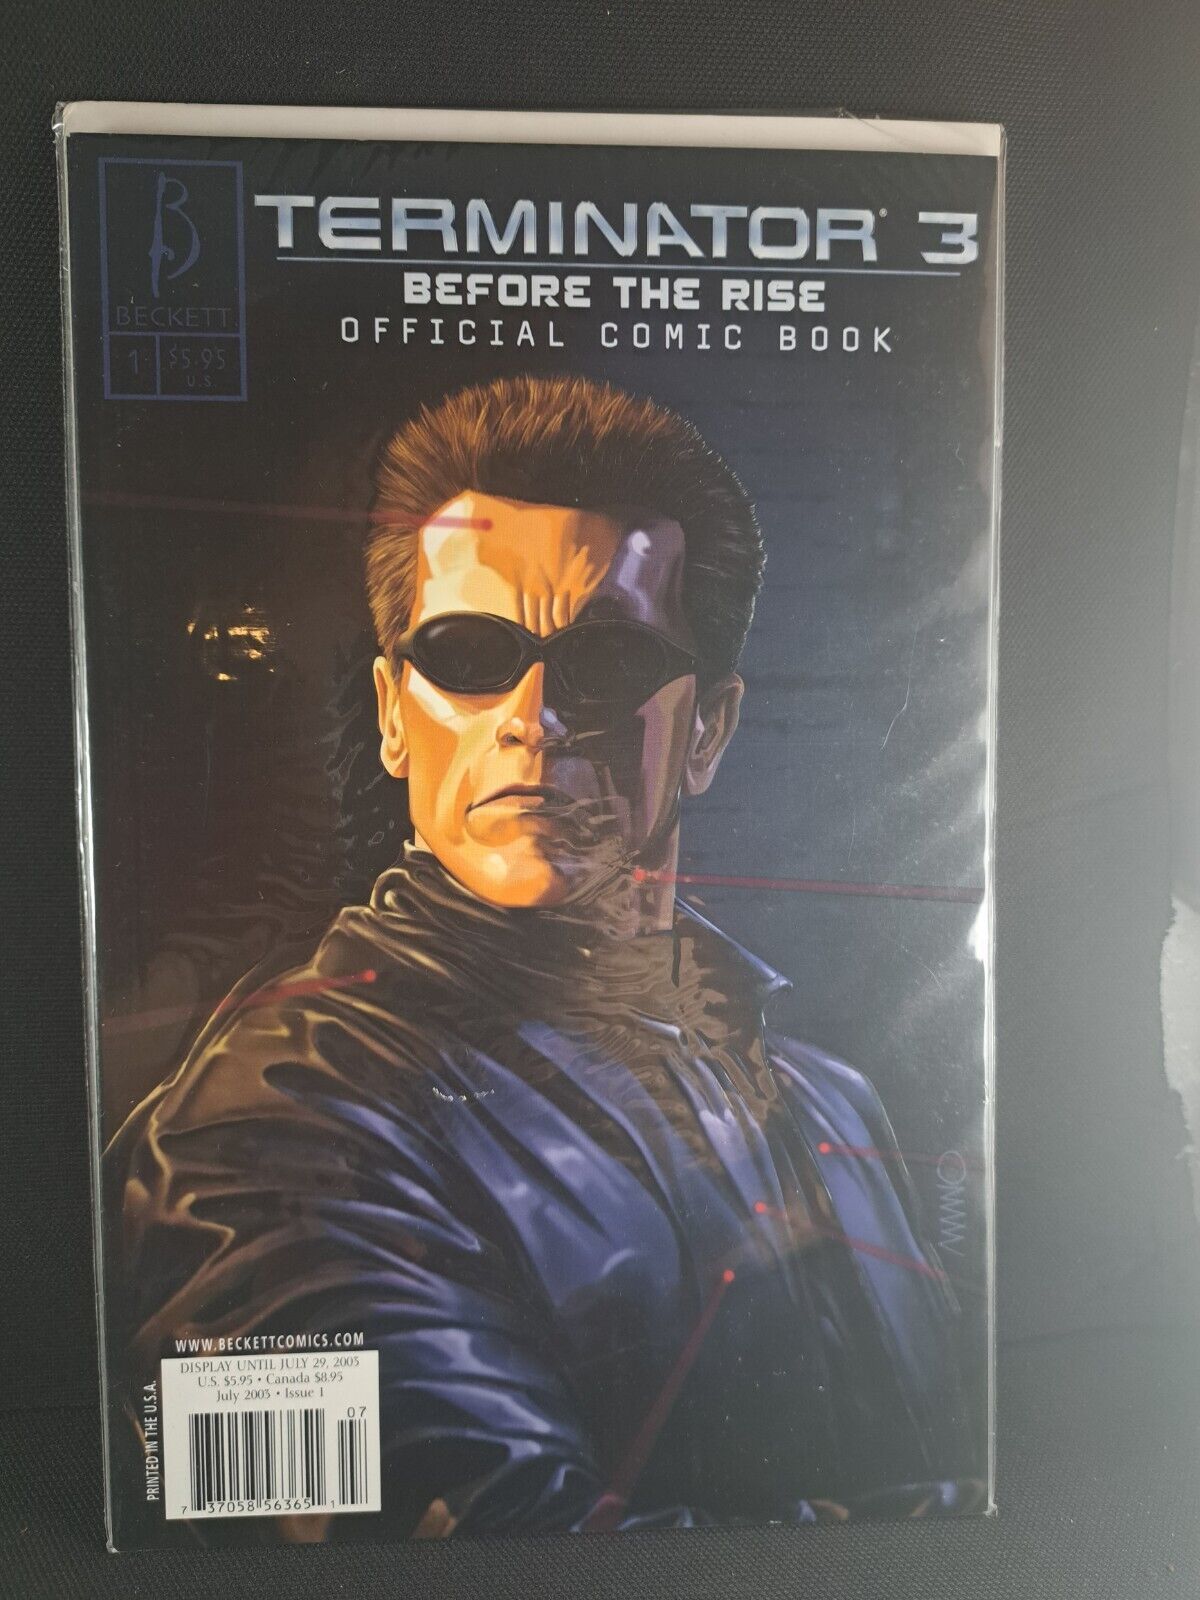 Terminator 3 Before the Rise Official Comic Book #1